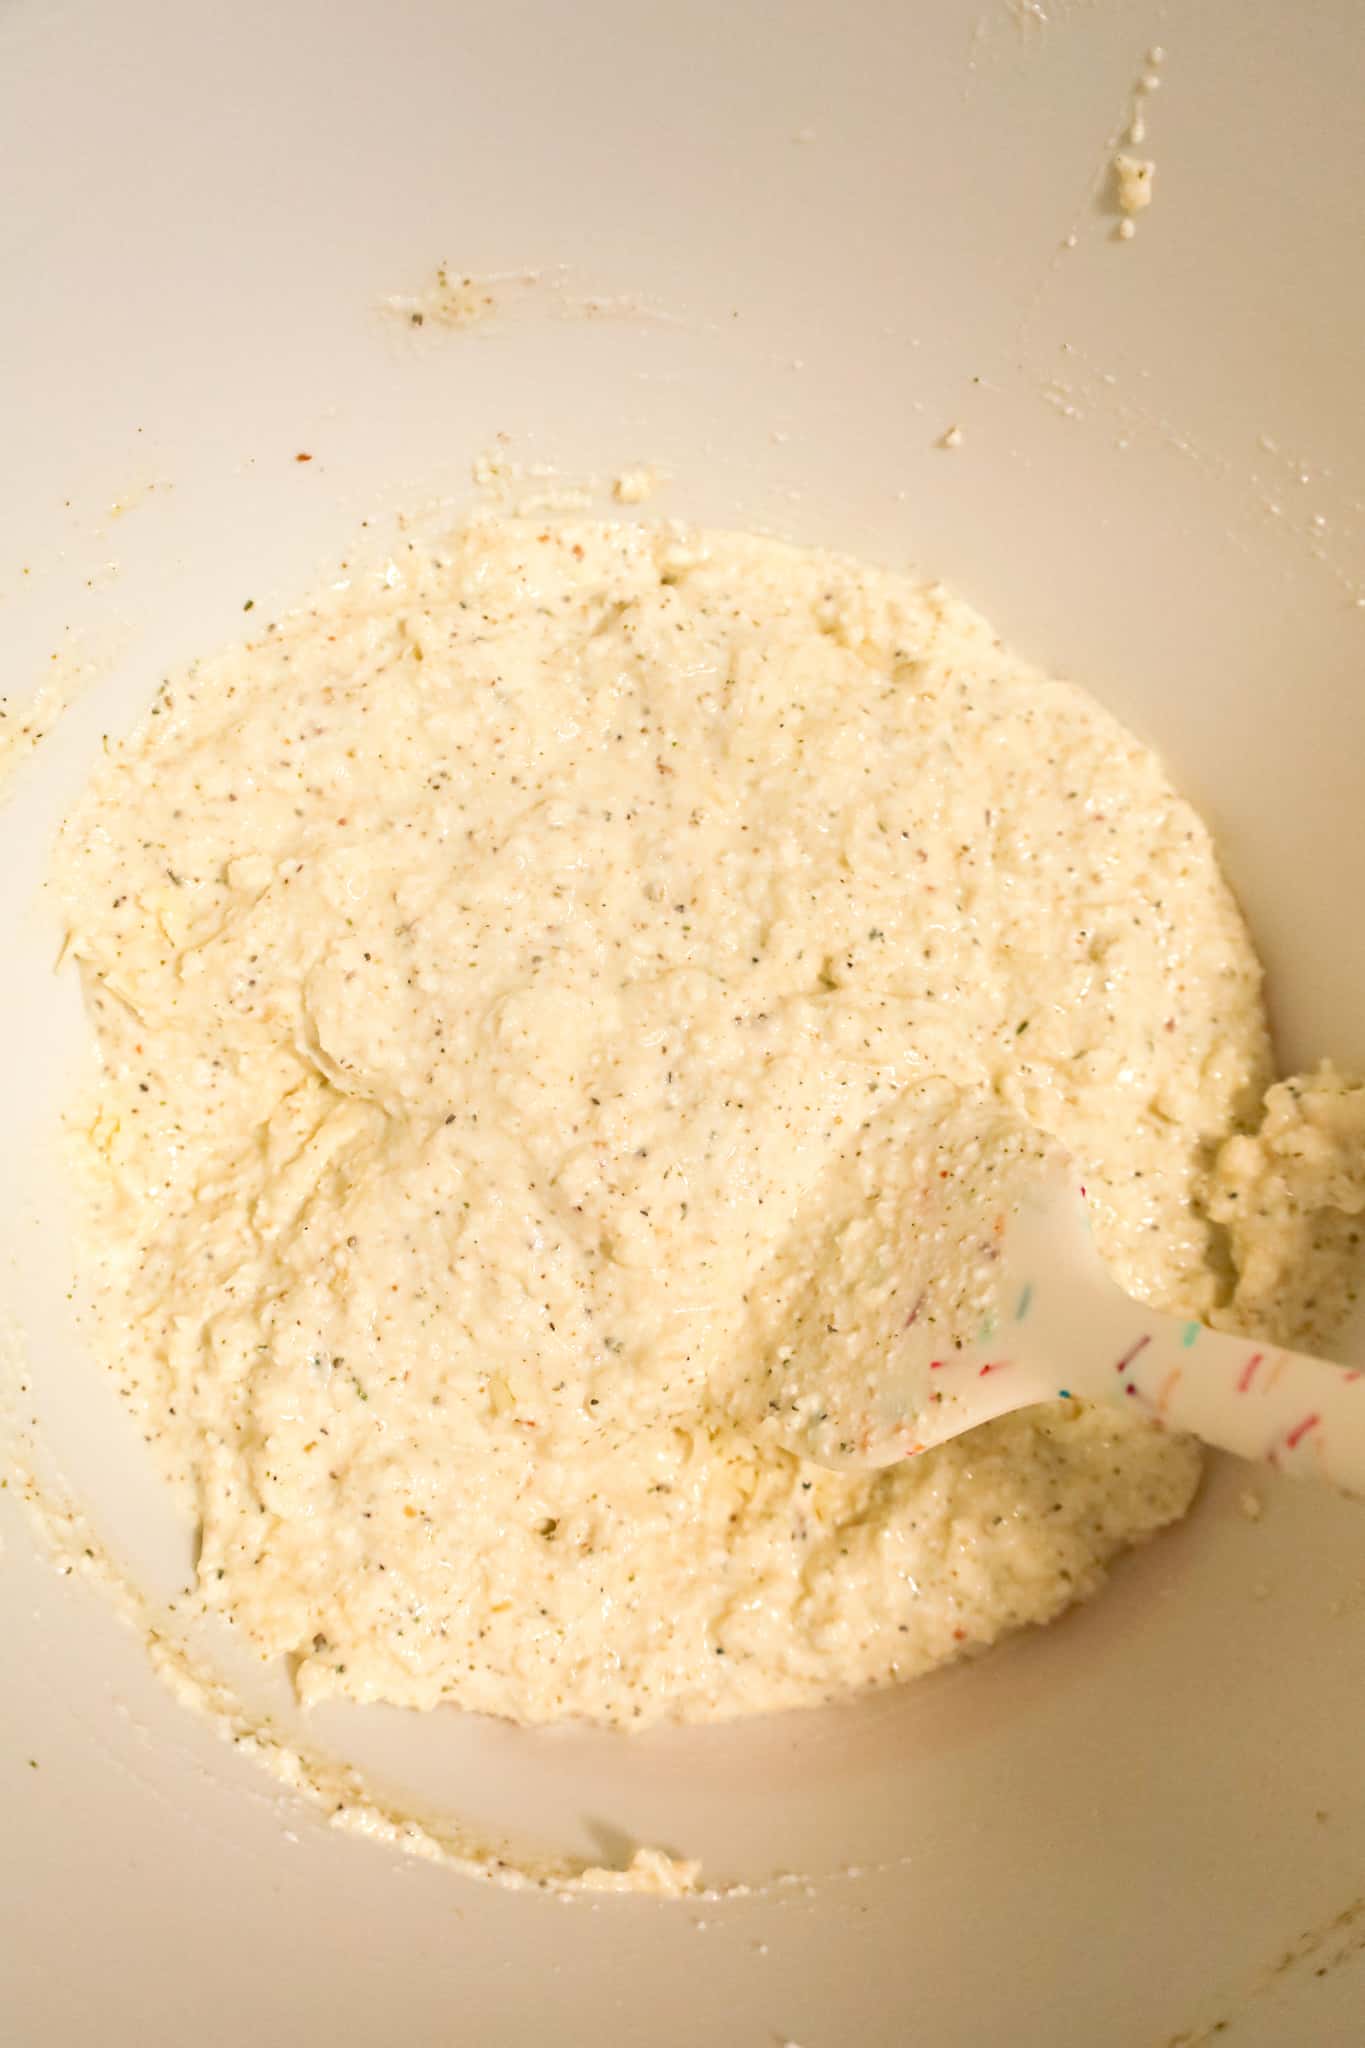 shredded cheese and ricotta mixture in a mixing bowl